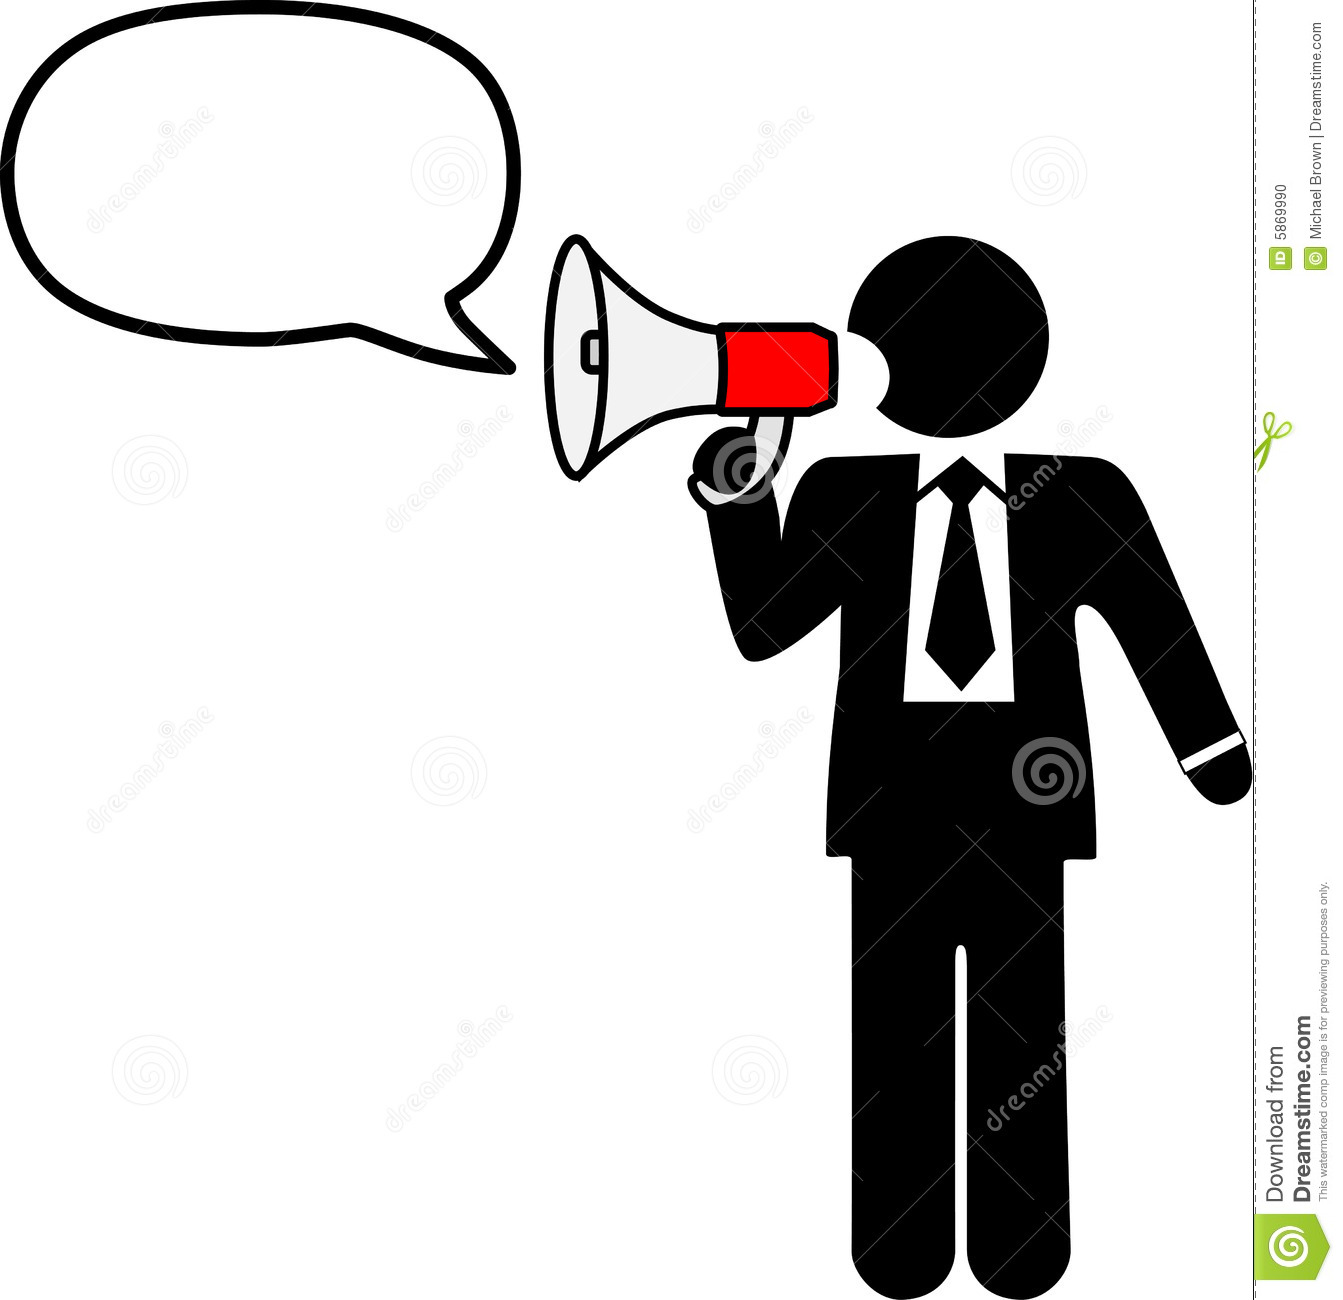 To Broadcast Talk An Ad Announcement Communication In A Bullhorn